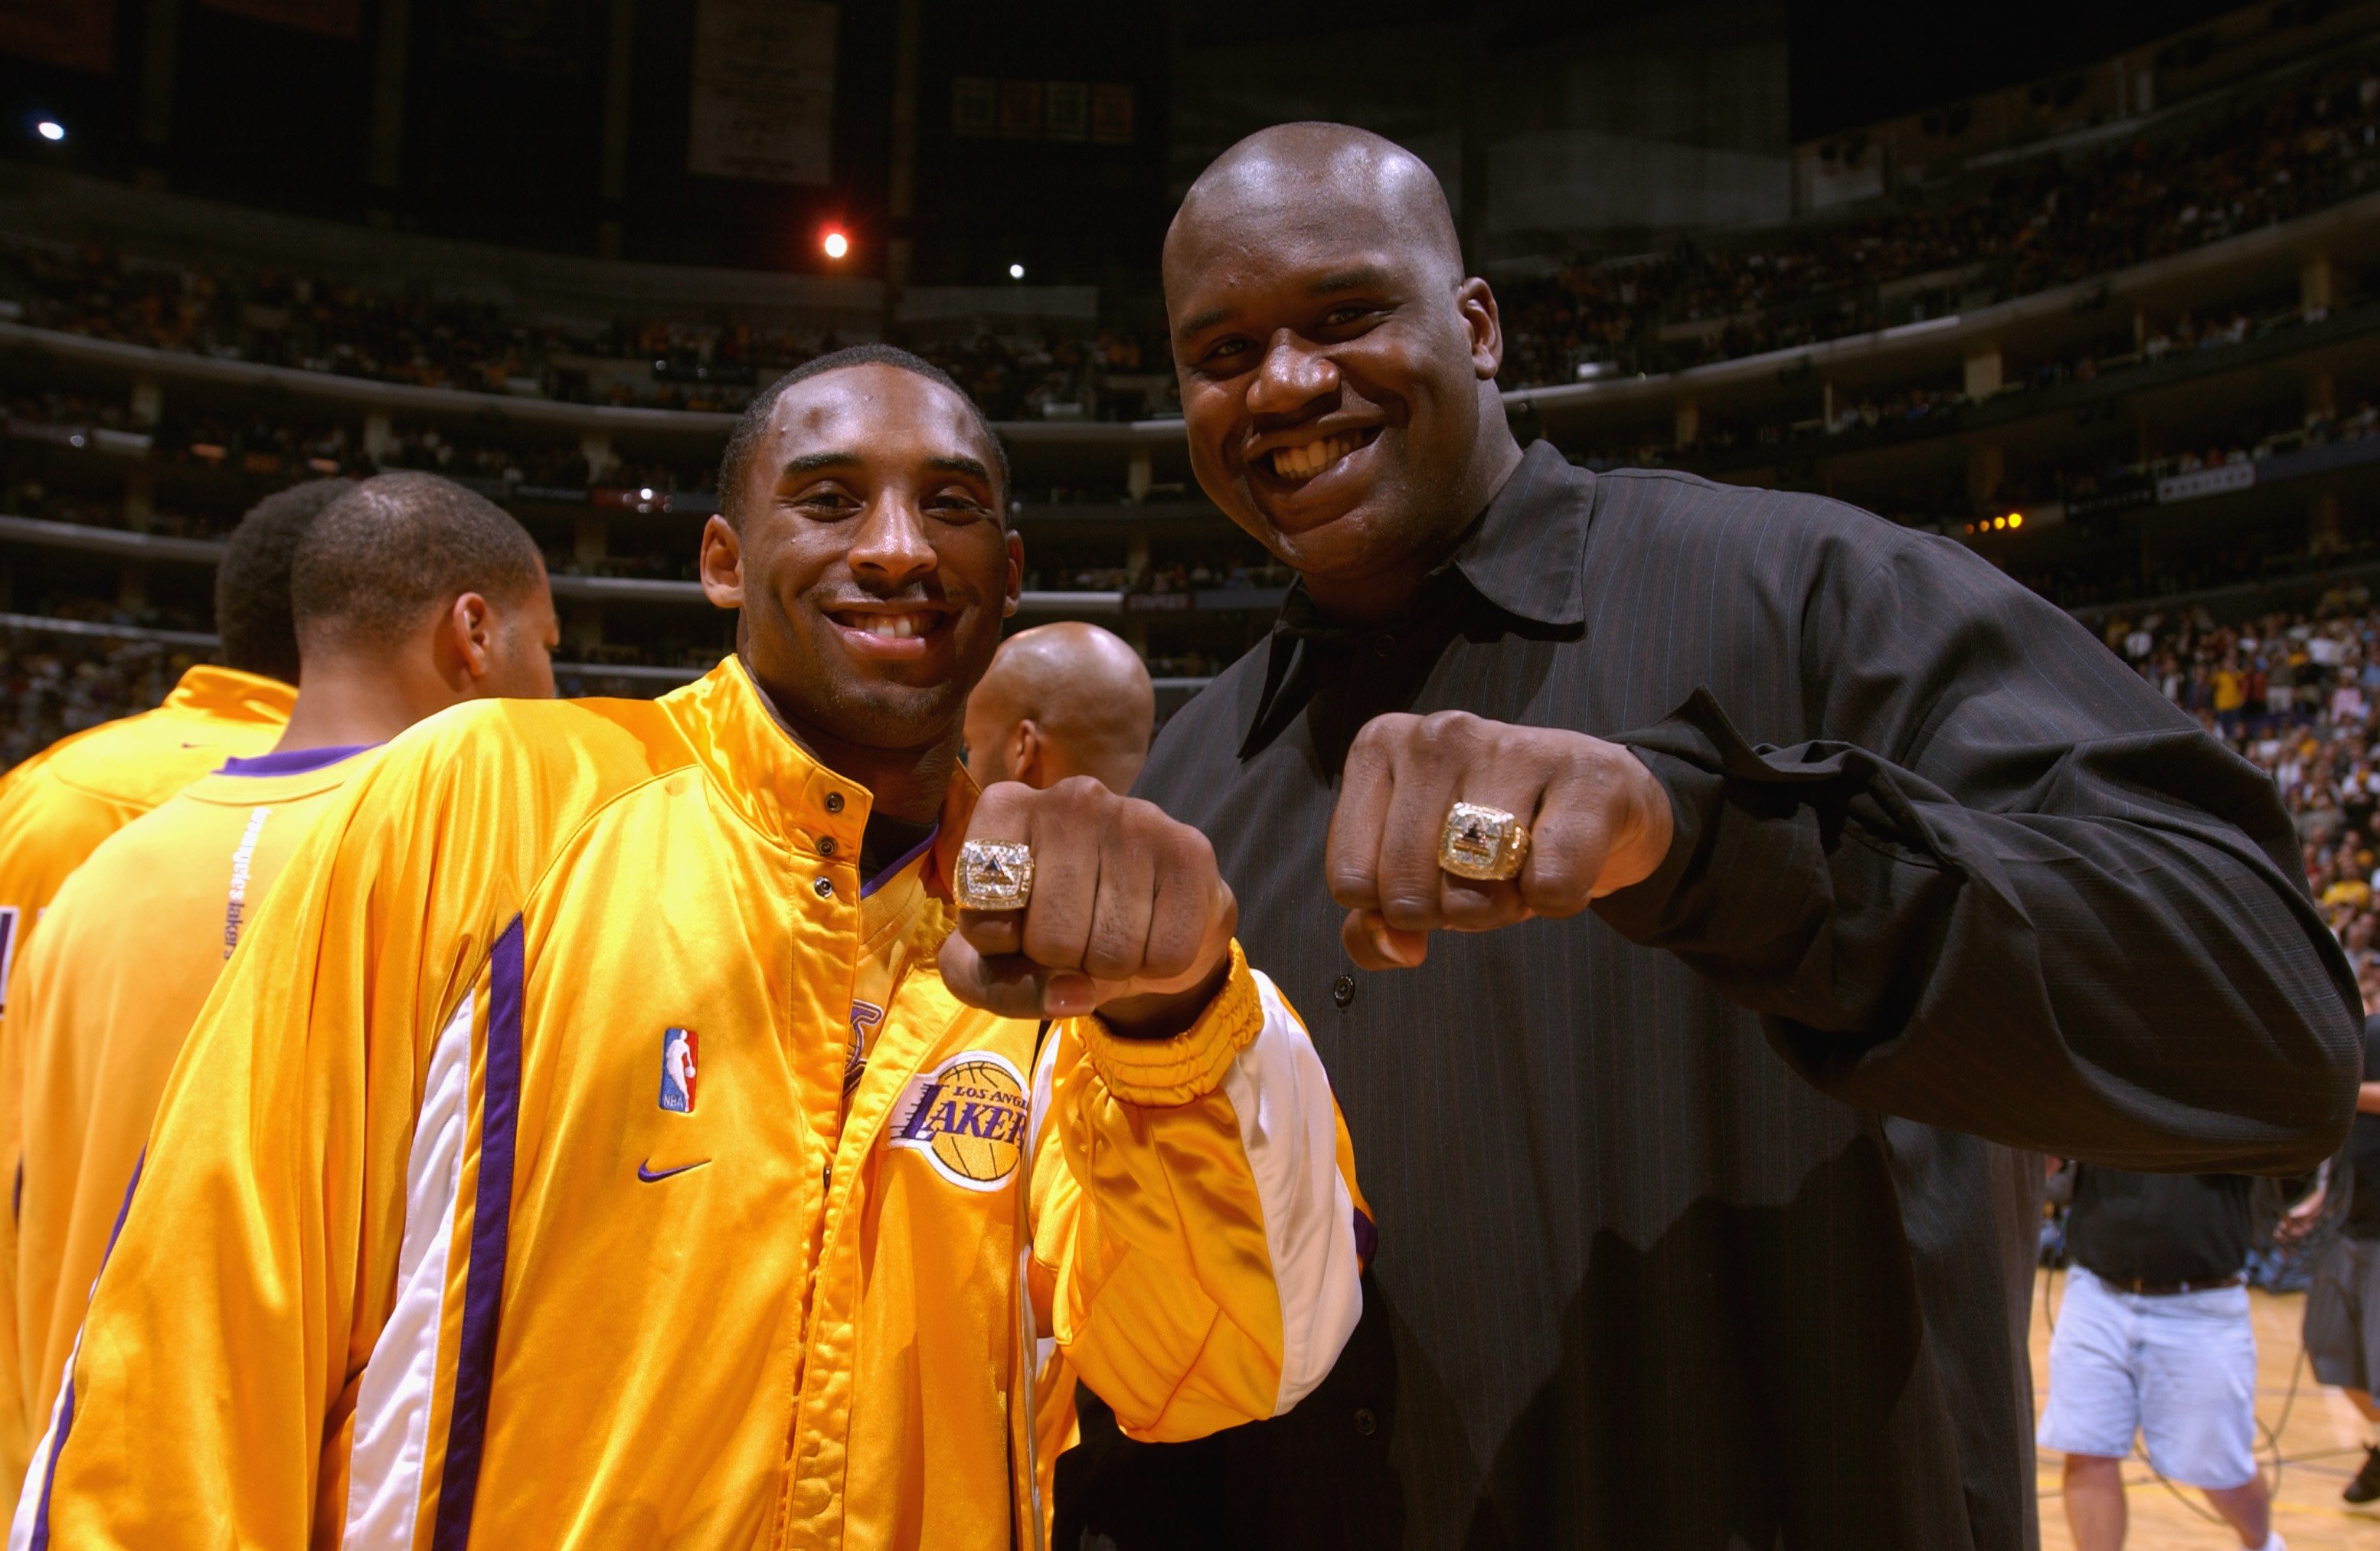 Kobe Bryant and Shaquille O'Neal showing their rings at Staples Center on October 29, 2002 in Los Angeles, California. | Source: Getty Images